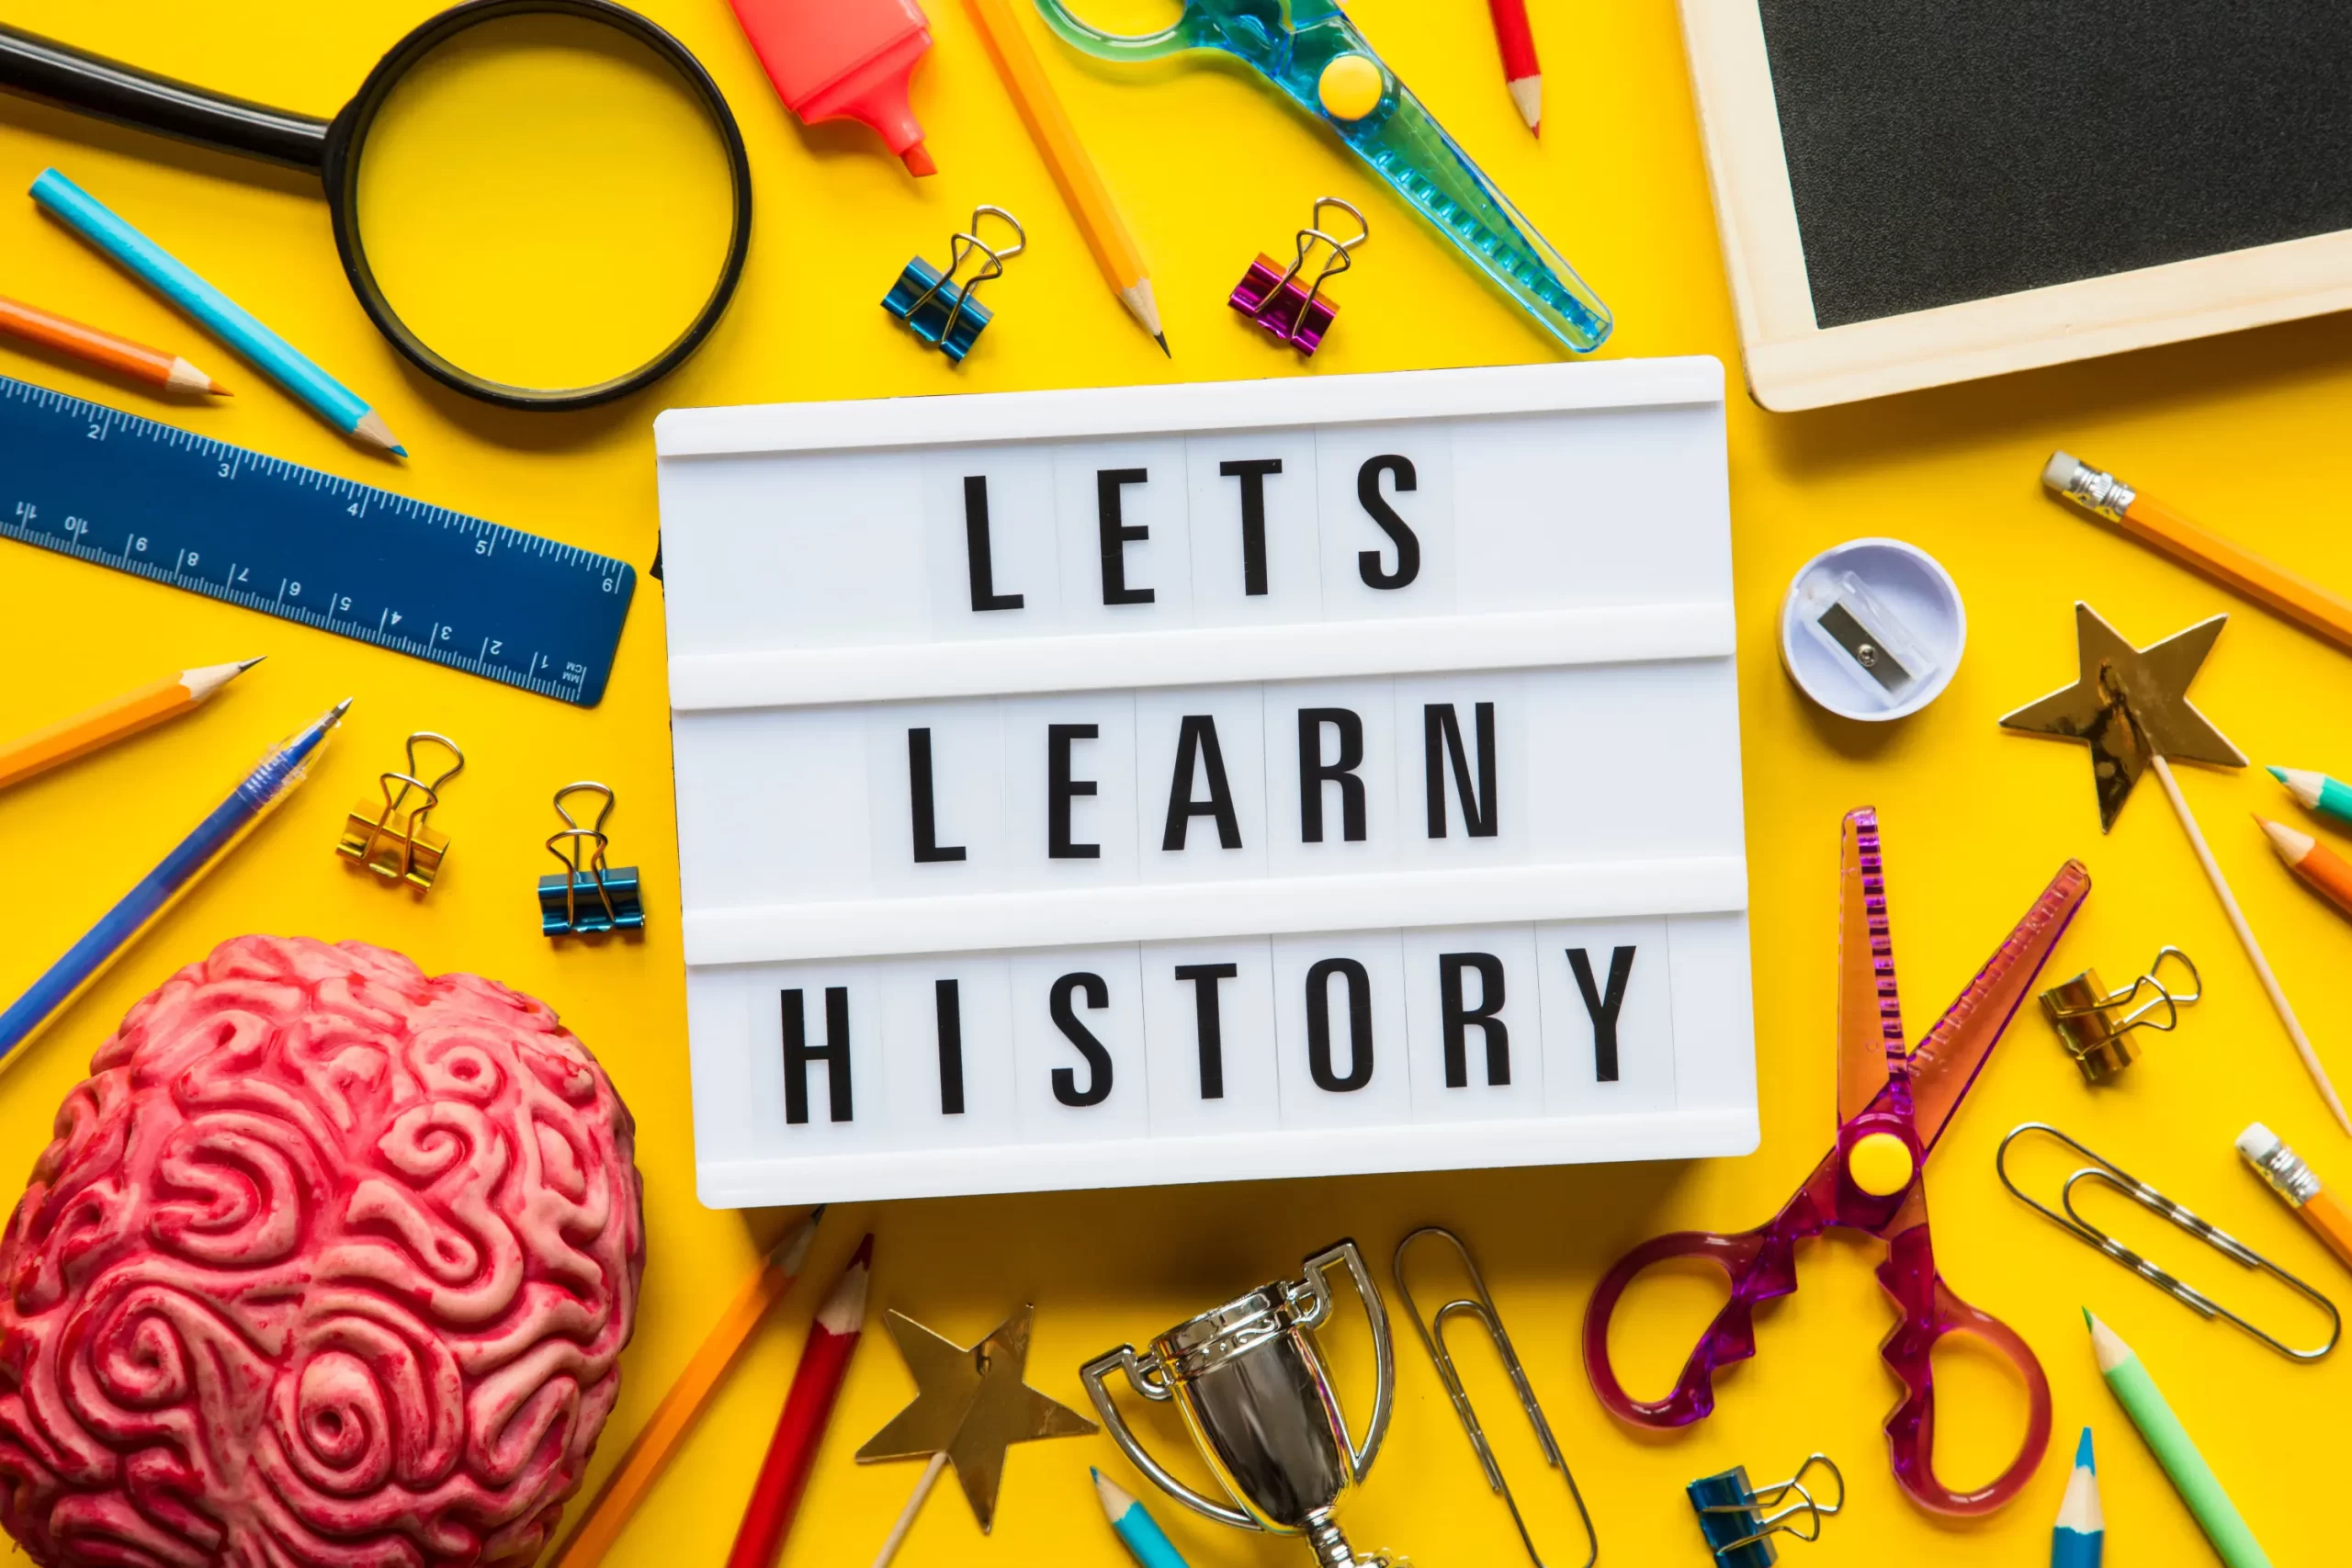 Guide to Choosing High School History Classes